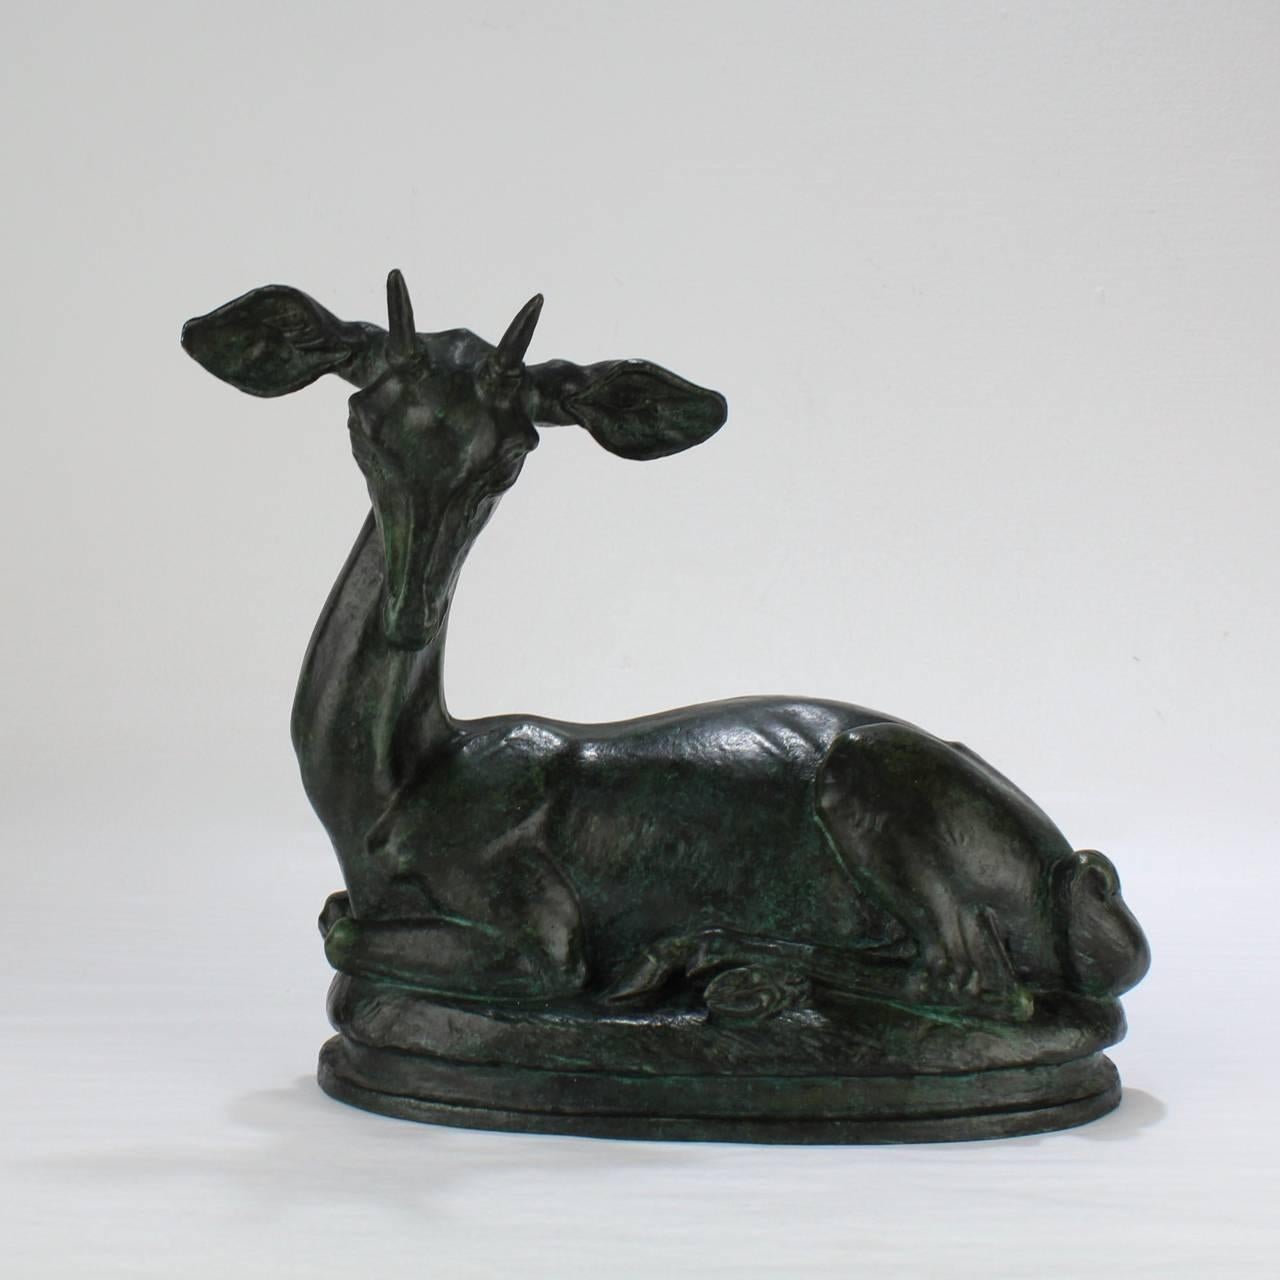 A superb Modernist model of a Gazelle by Walter Rotan (1912-2001) with a very dark verdigris patina.

Cast at the Roman Bronze Works in the 1930s or 1940s.

The bronze is stamped Roman Bronze Corp. NY to the reverse and bears an integral signature